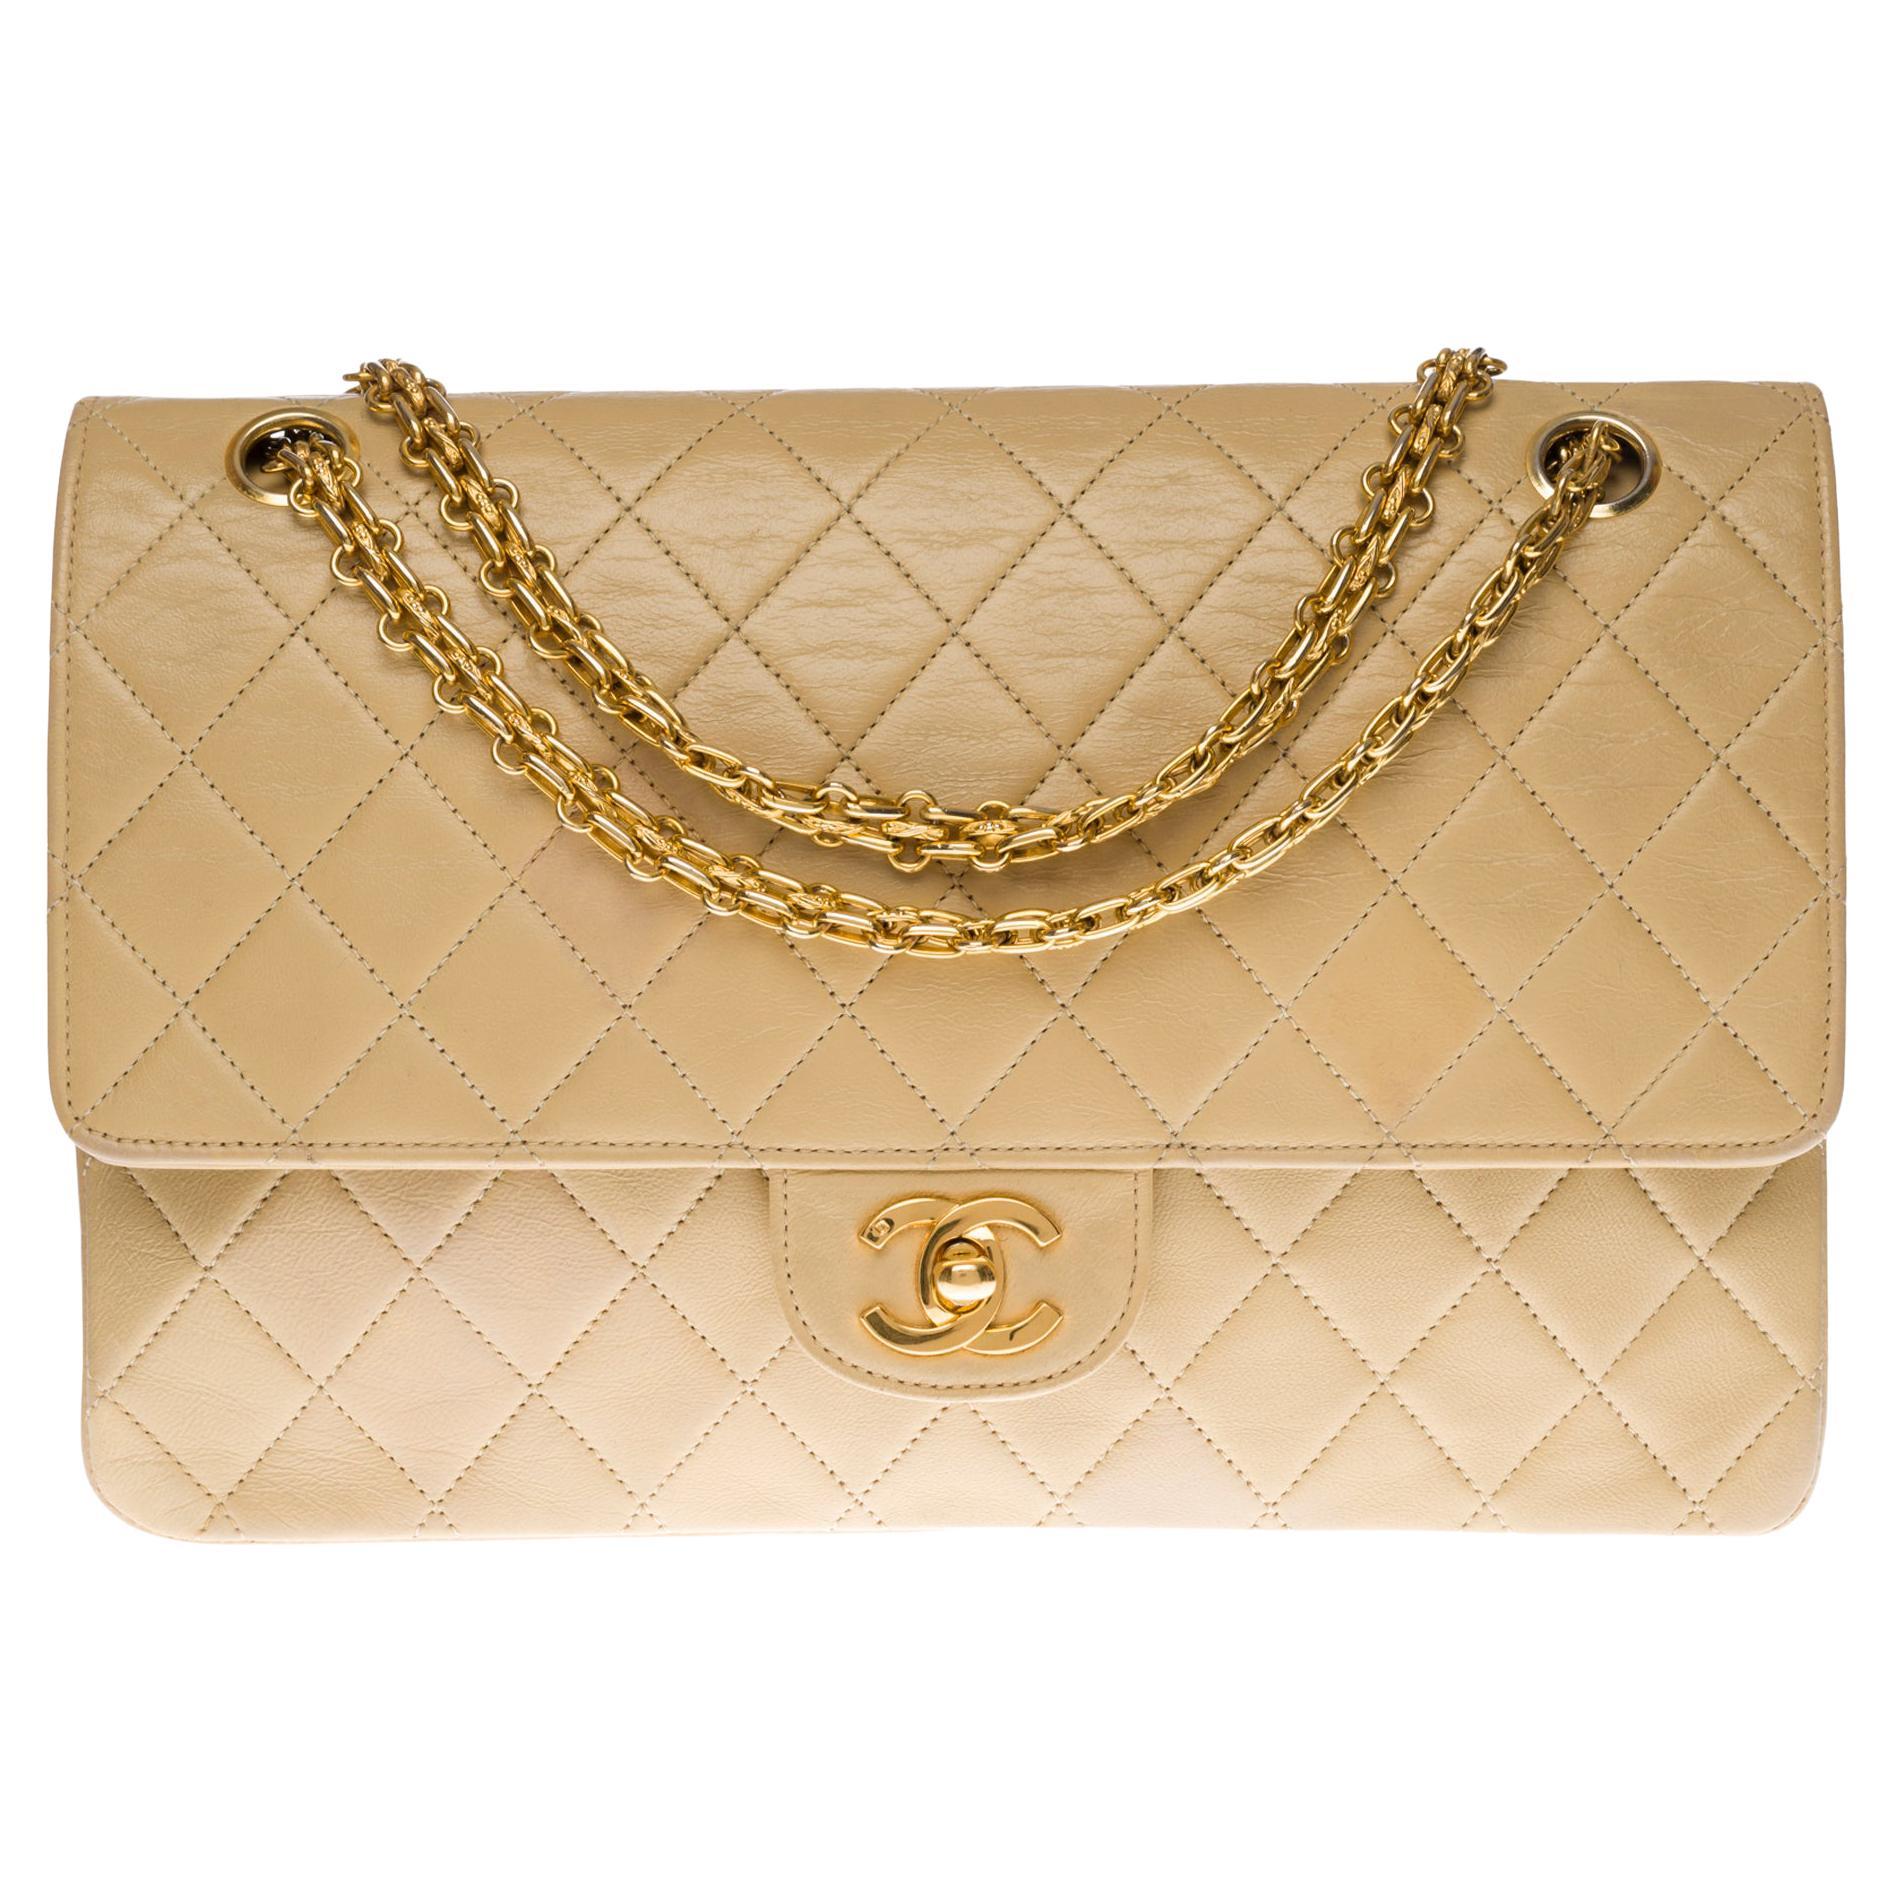 Chanel Timeless/Classic double Flap shoulder bag in beige quilted lambskin, GHW